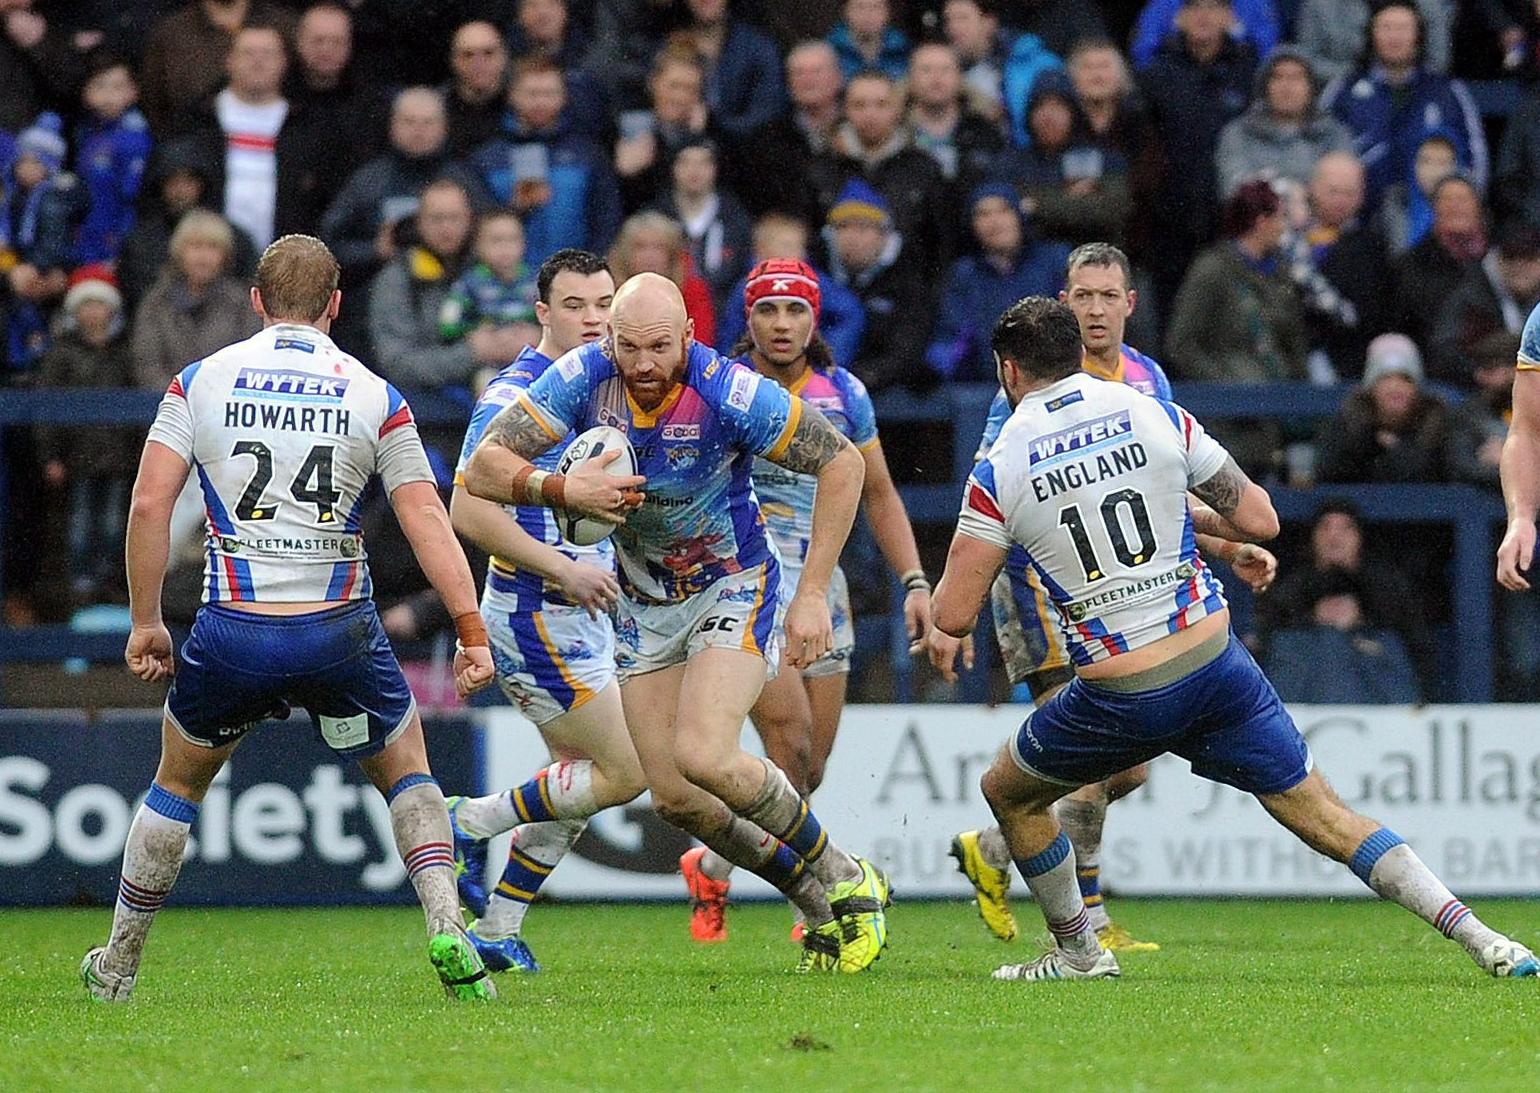 Leeds Rhinos and rugby league fans missing their Boxing Day tradition